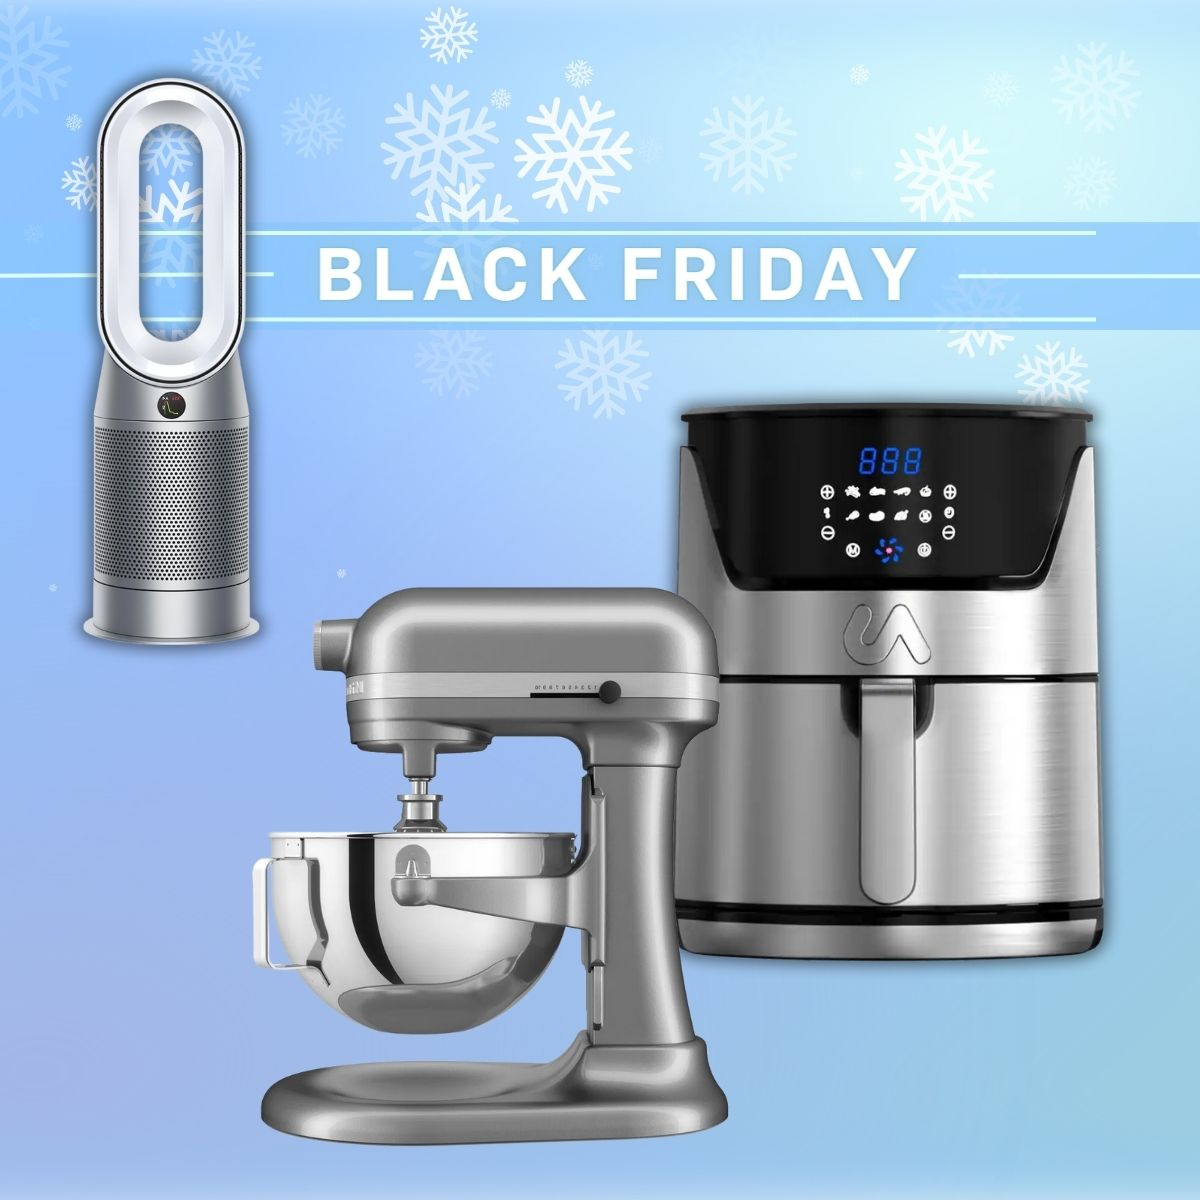 28 Black Friday Home Deals That Are Too Good to Pass Up: Dyson & More